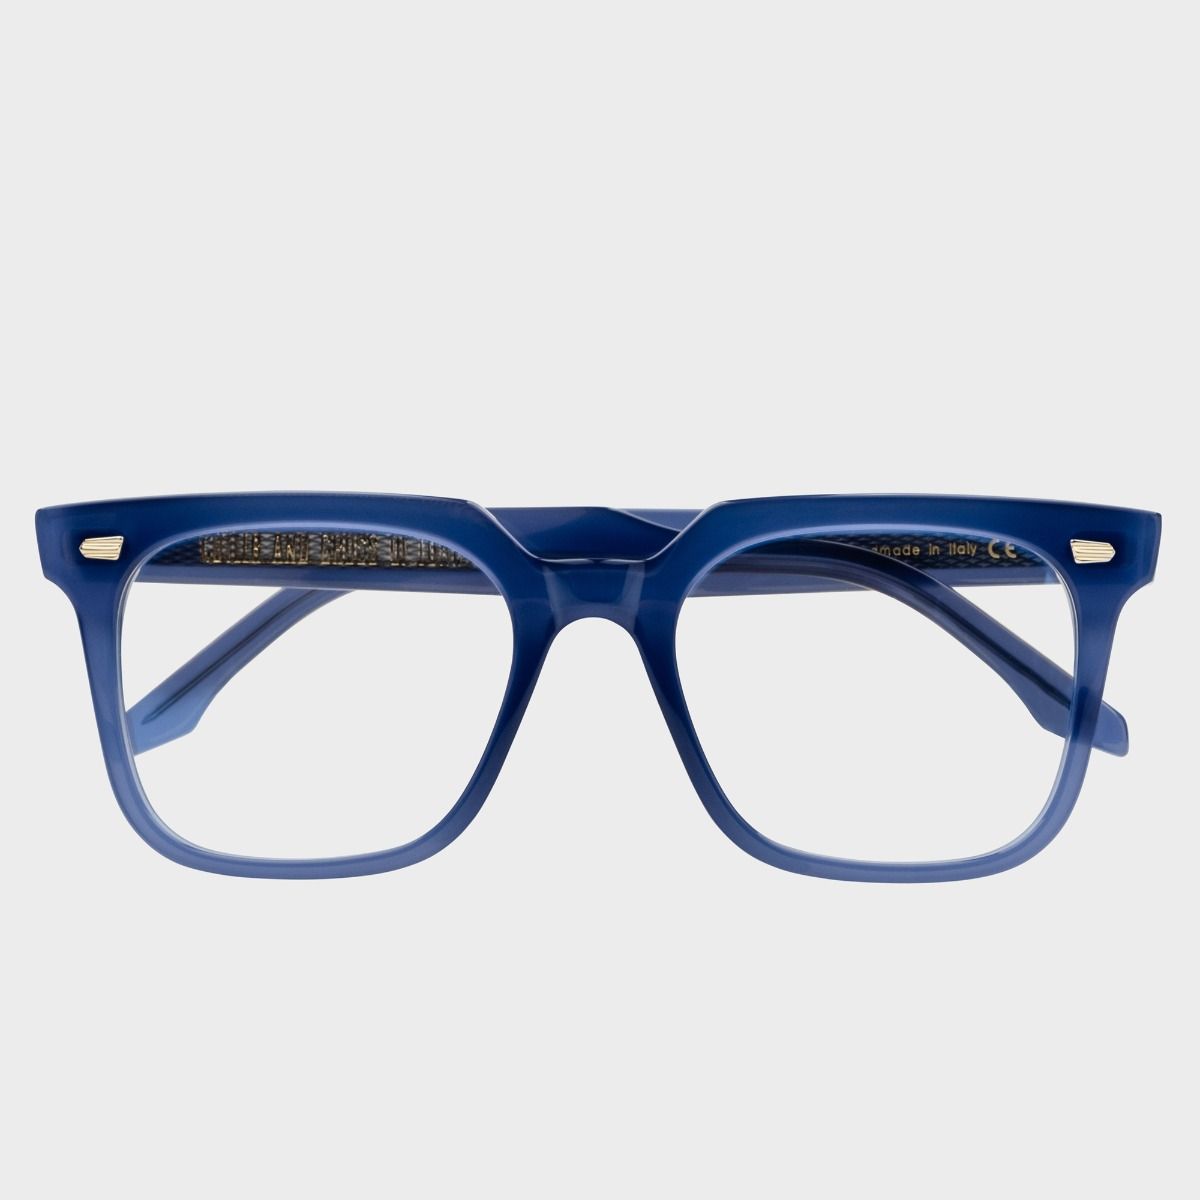 Cutler and Gross, 1387 Optical Square Glasses - Bowery Blue